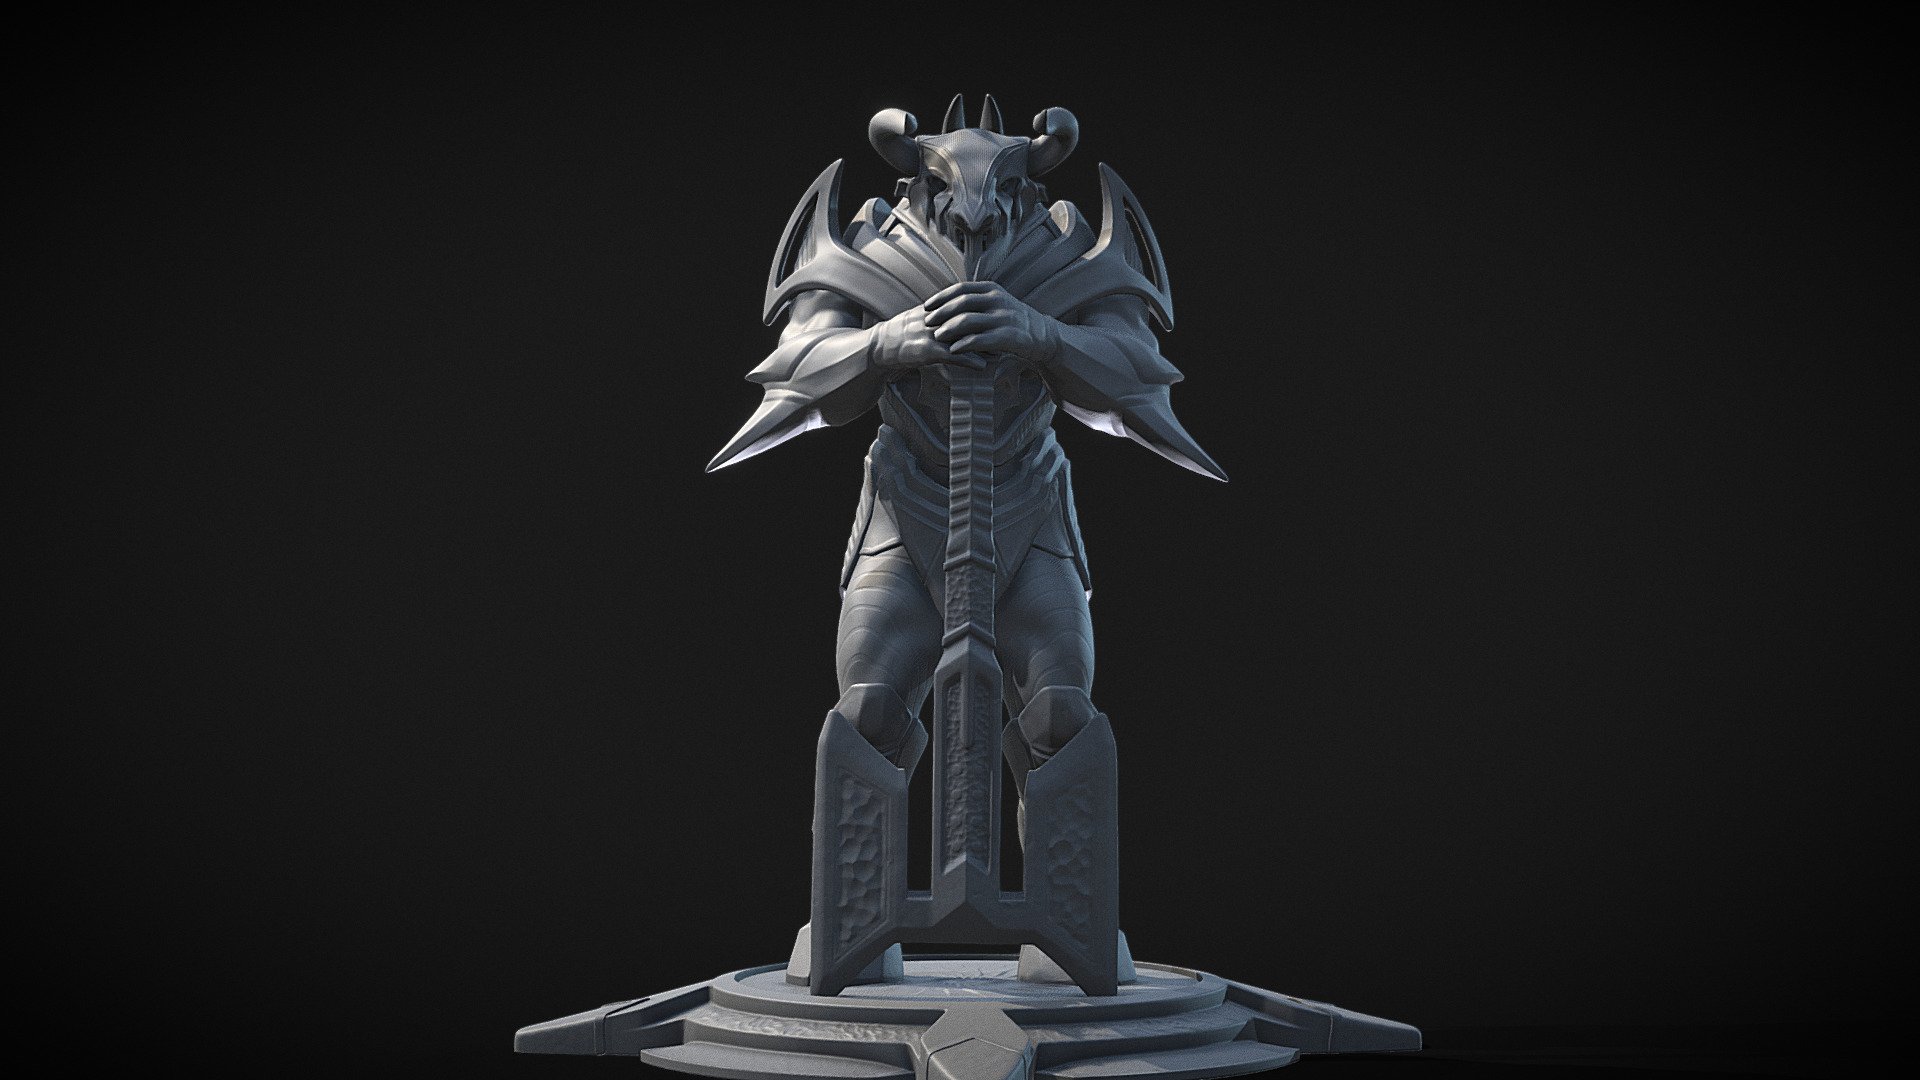 Zbrush
Personal project
Cuts and Joints ready 3d model